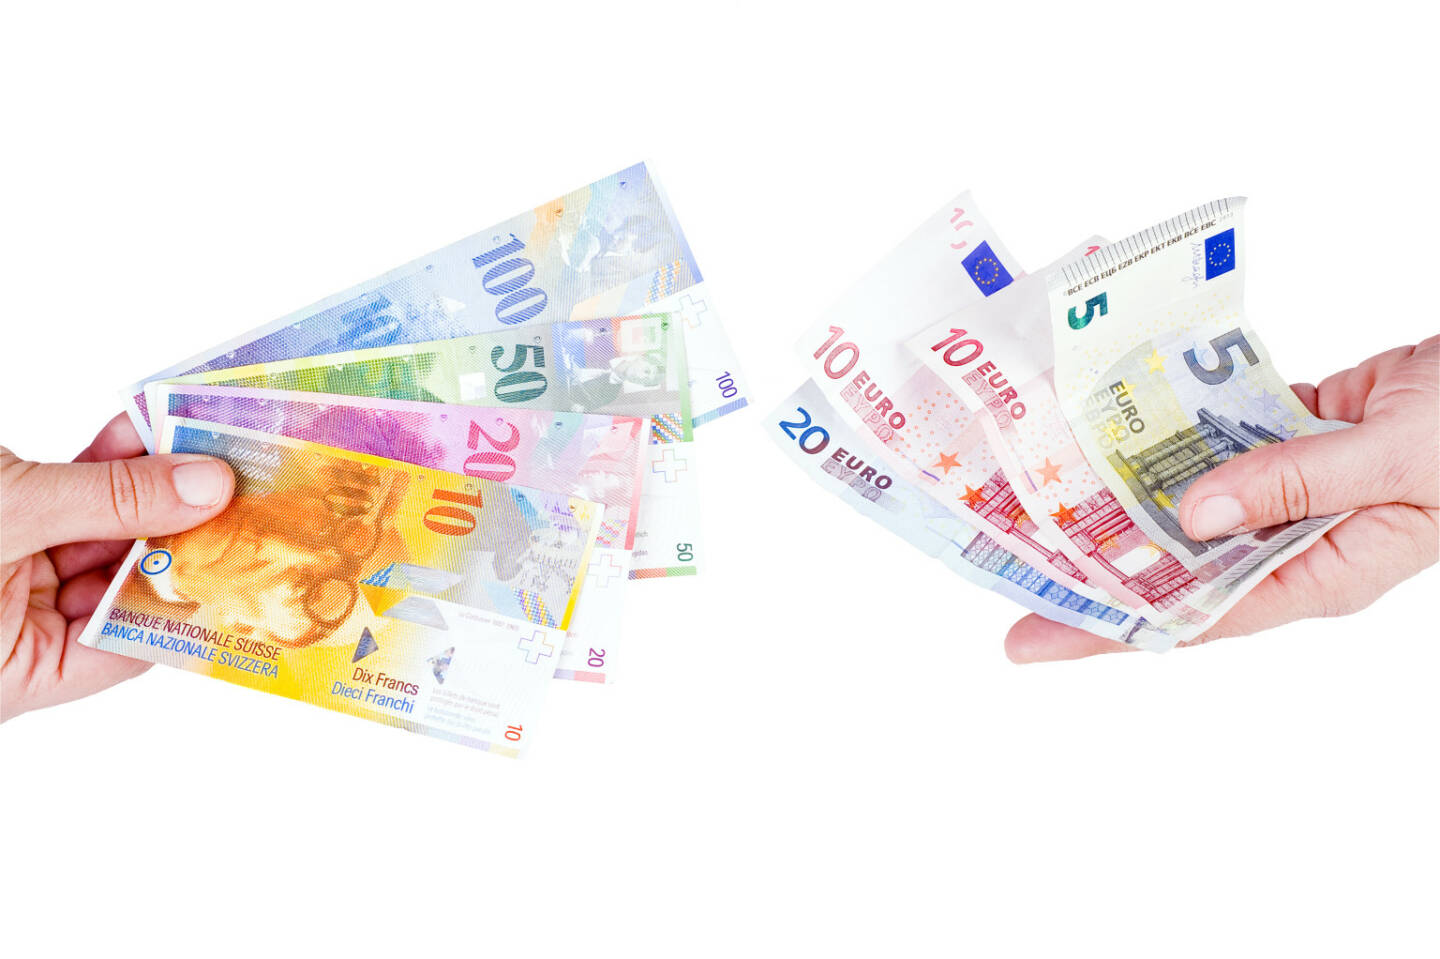 Franken, Euro, EUR/CHF, Wechsel, Geld http://www.shutterstock.com/de/pic-244565860/stock-photo-euro-and-swiss-franc-in-the-hands-of.html